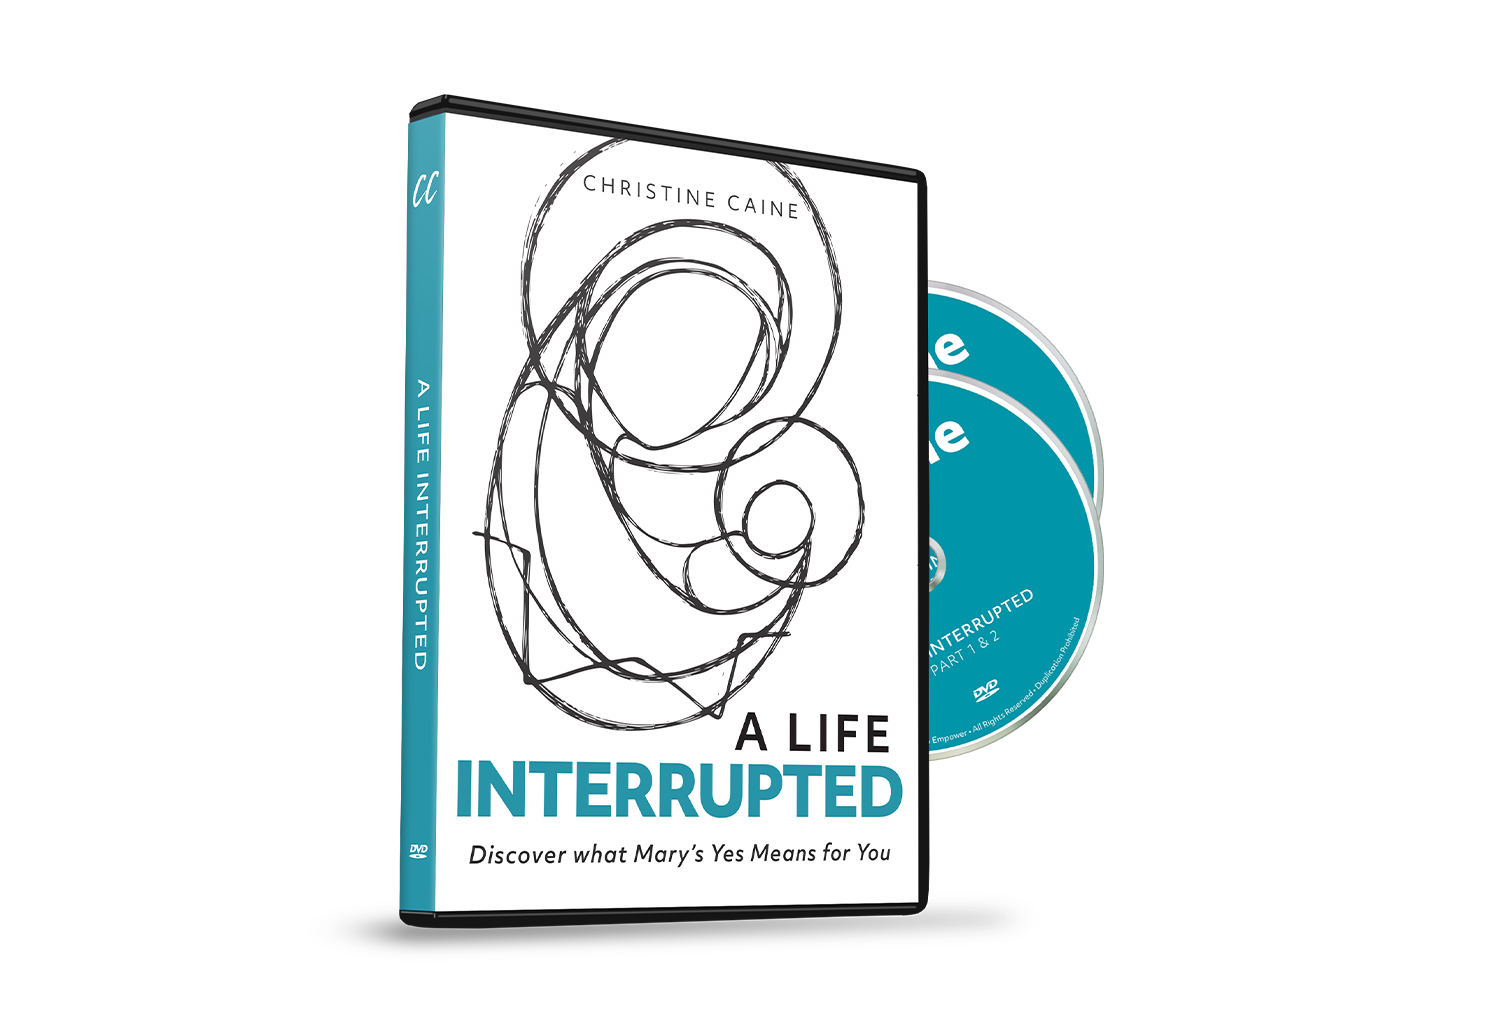 A Life Interrupted by Christine Caine on TBN